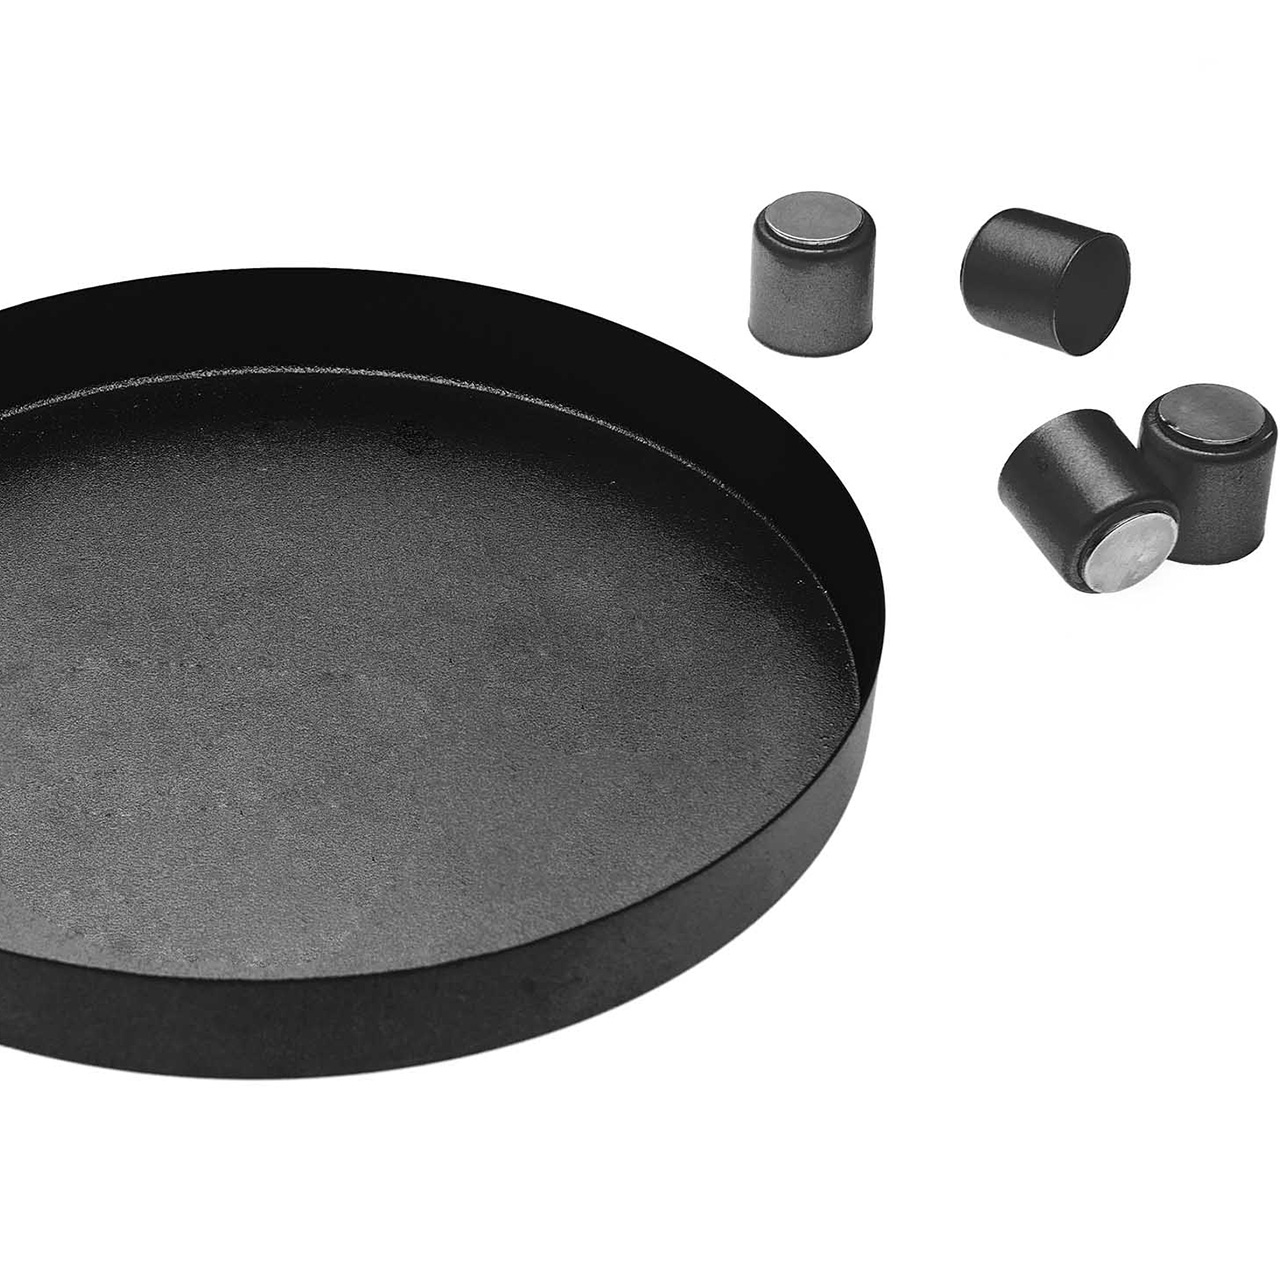 Metal Tray and Candle Holders - Black